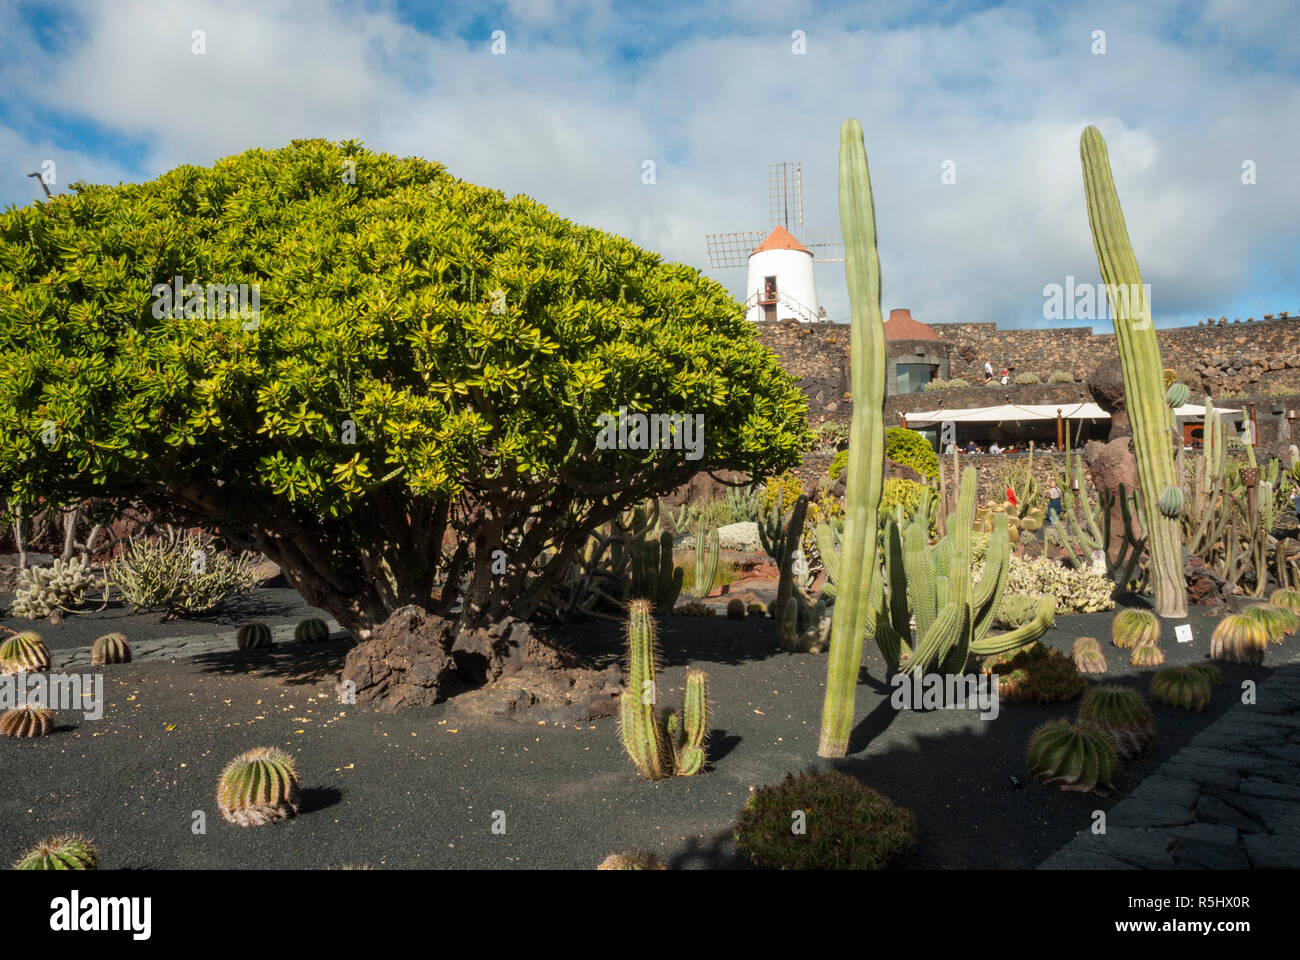 Reclaimed from an old quarry is the spectacular Cactus Garden at Guatiza, Lanzarote with over one thousand cactus varieties and traditional windmill. Stock Photo